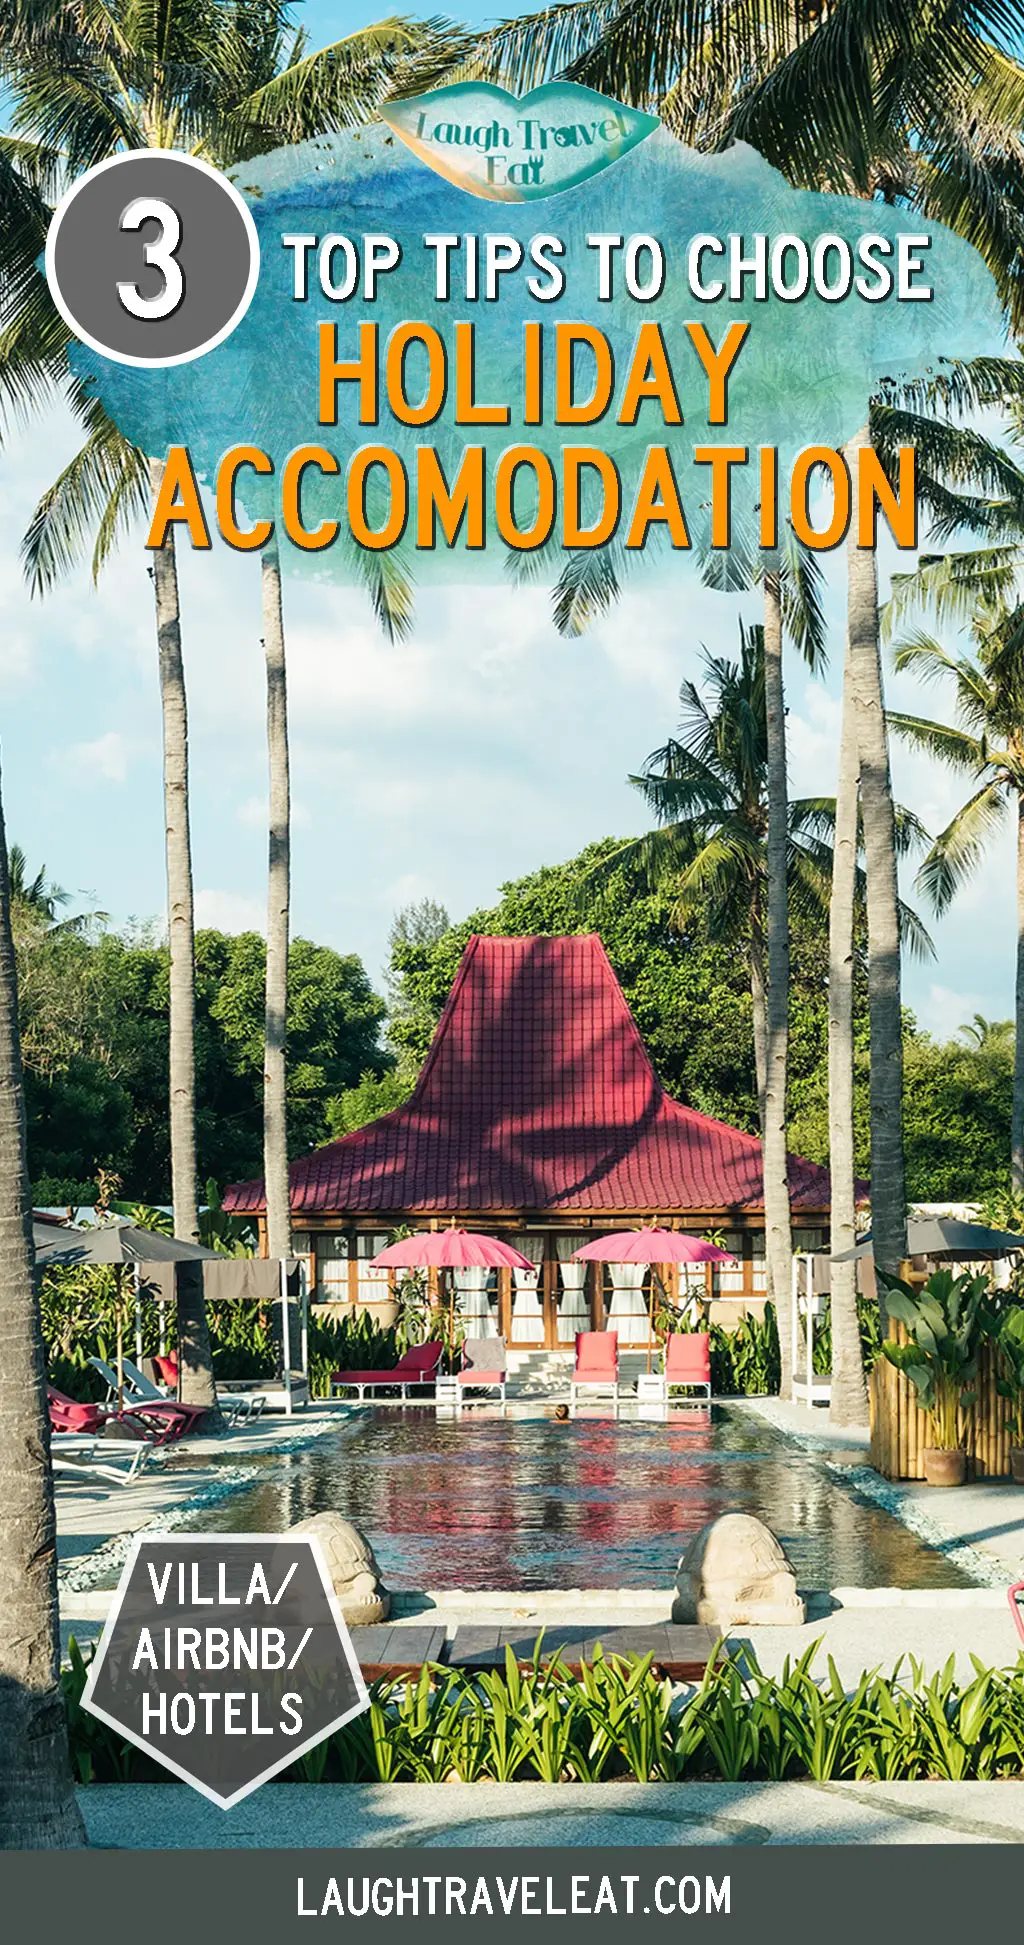 Heading on holiday? Here's 3 questions to ask when choosing your accommodation option #traveltips #airbnb #villa #hotel